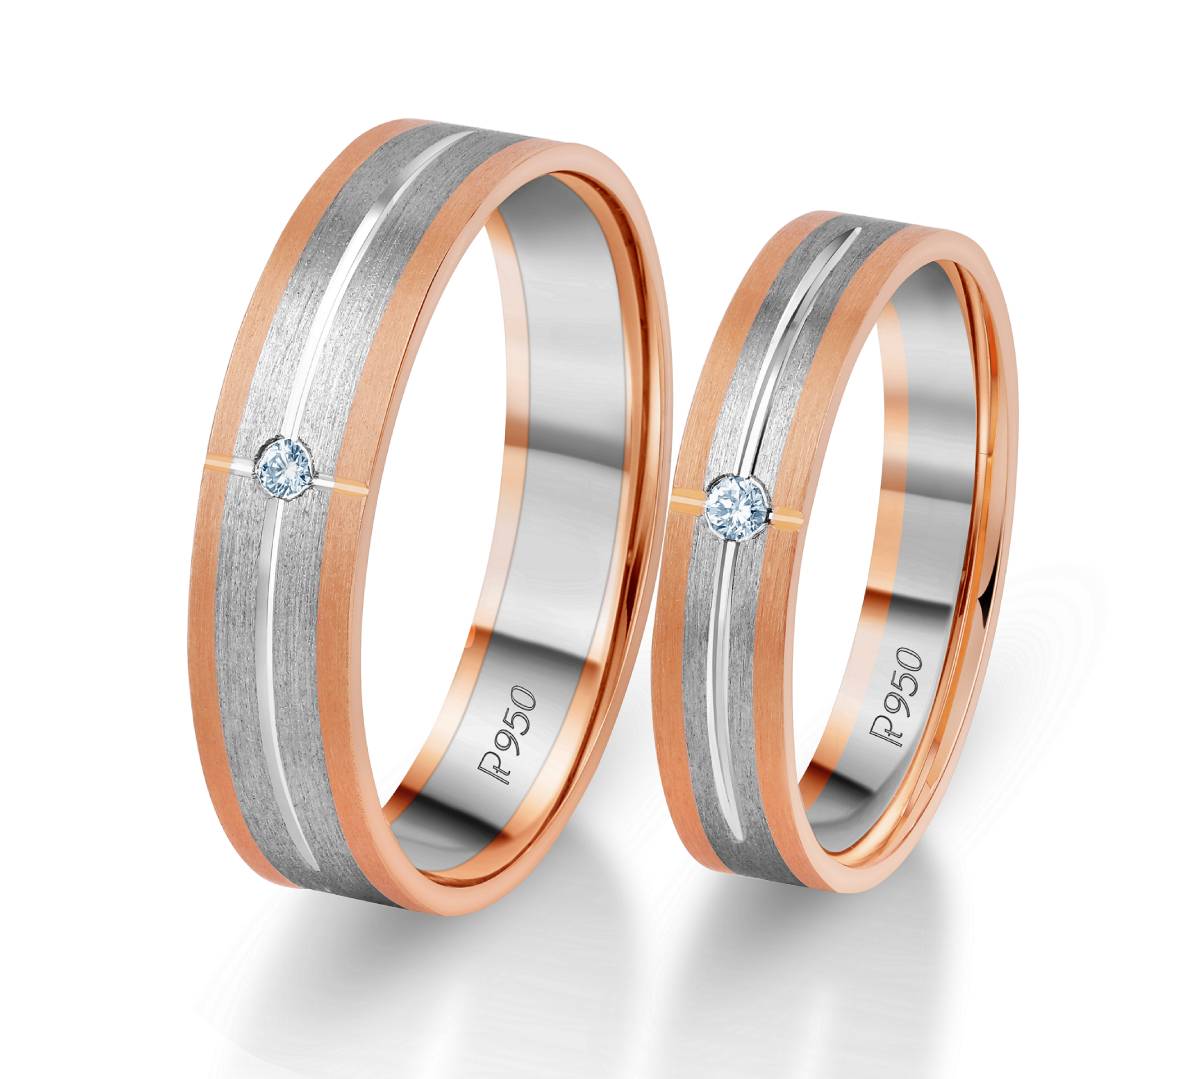 Platinum Love Bands for your Day of Love | Style & Beauty